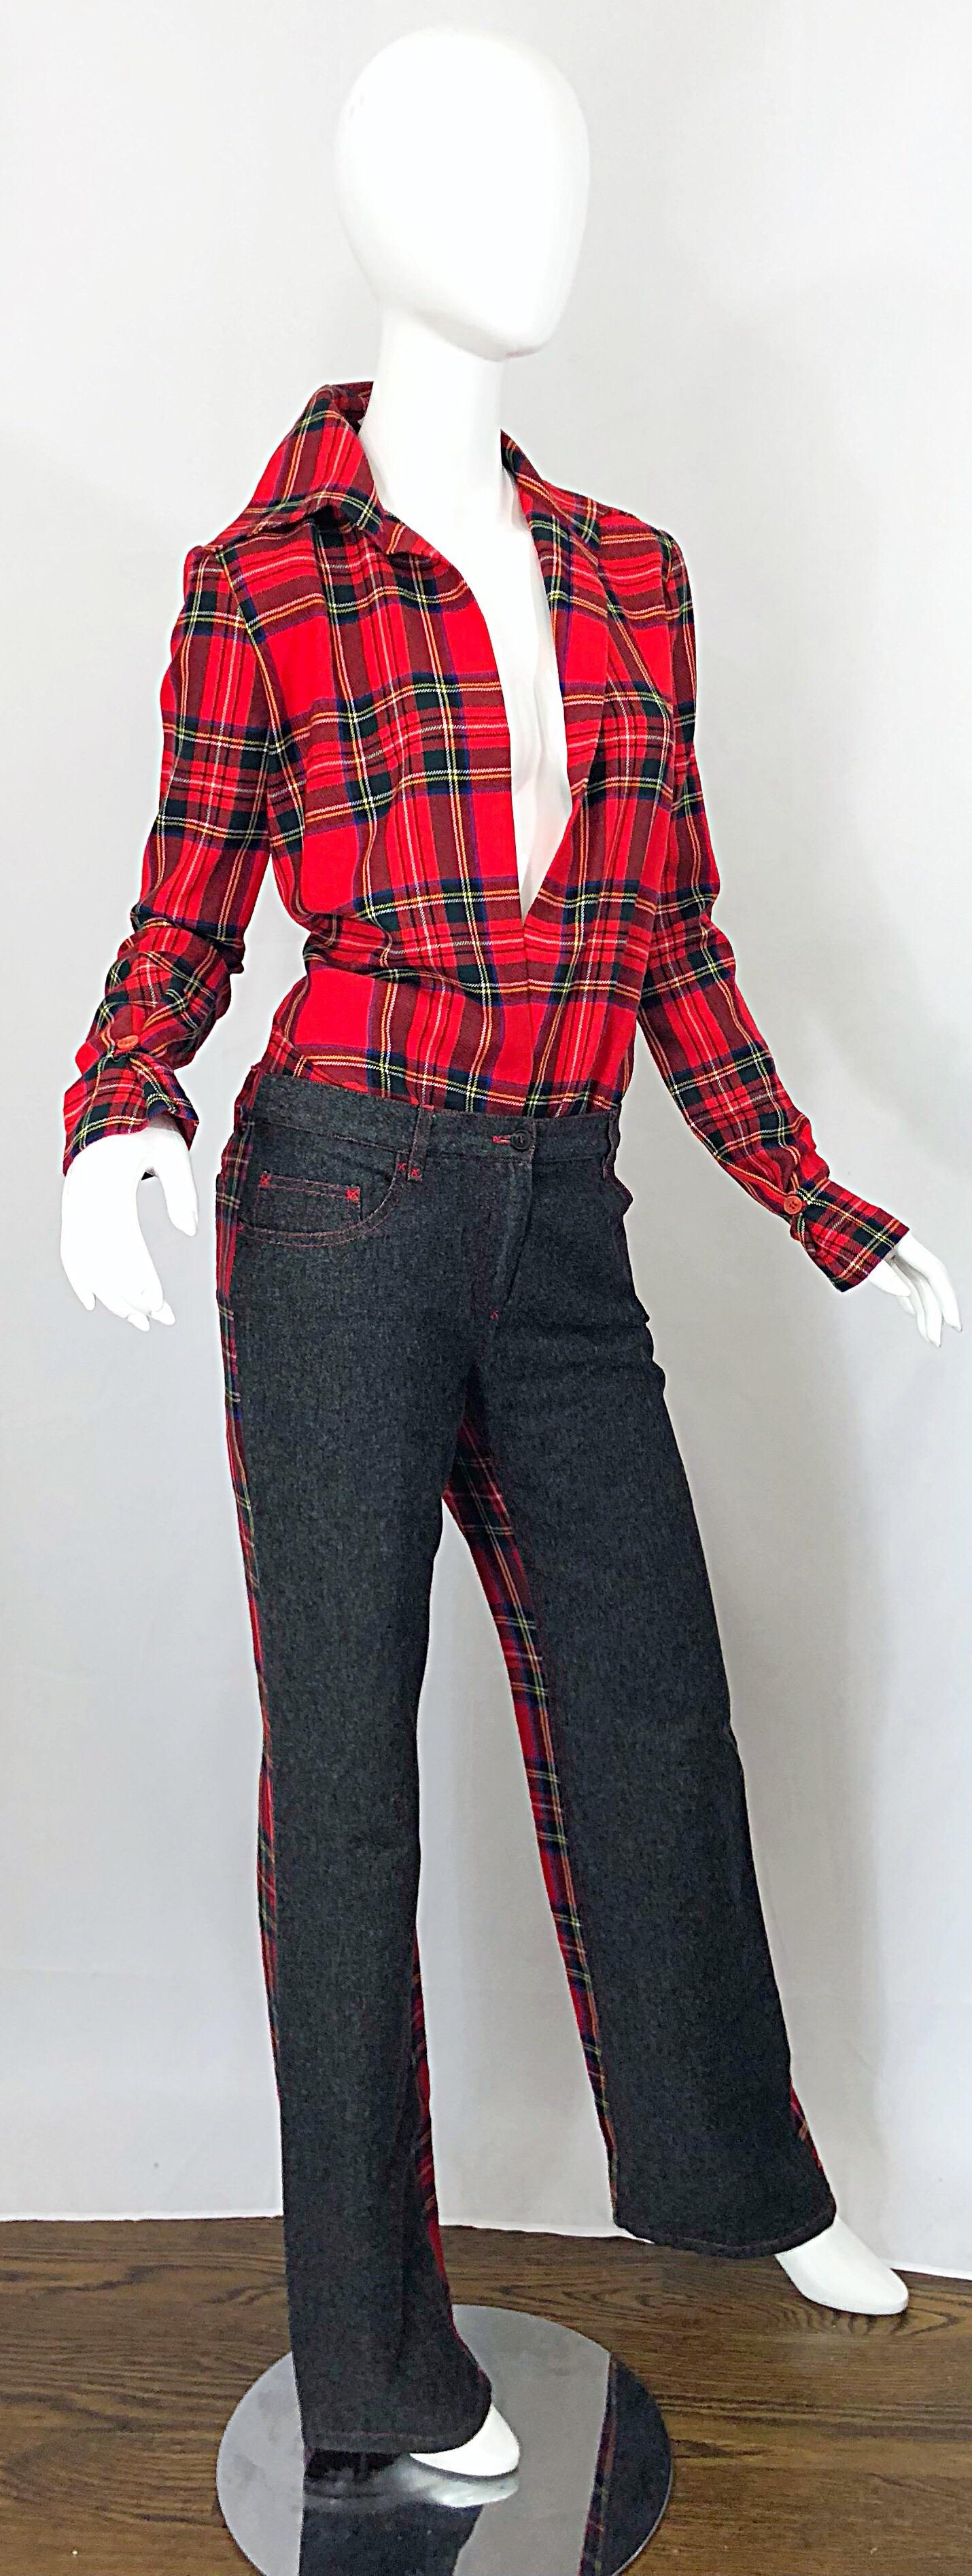 Rare 1990s Dolce & Gabbana Red Tartan Plaid Wool + Denim Flared Jeans and Shirt In Excellent Condition For Sale In San Diego, CA